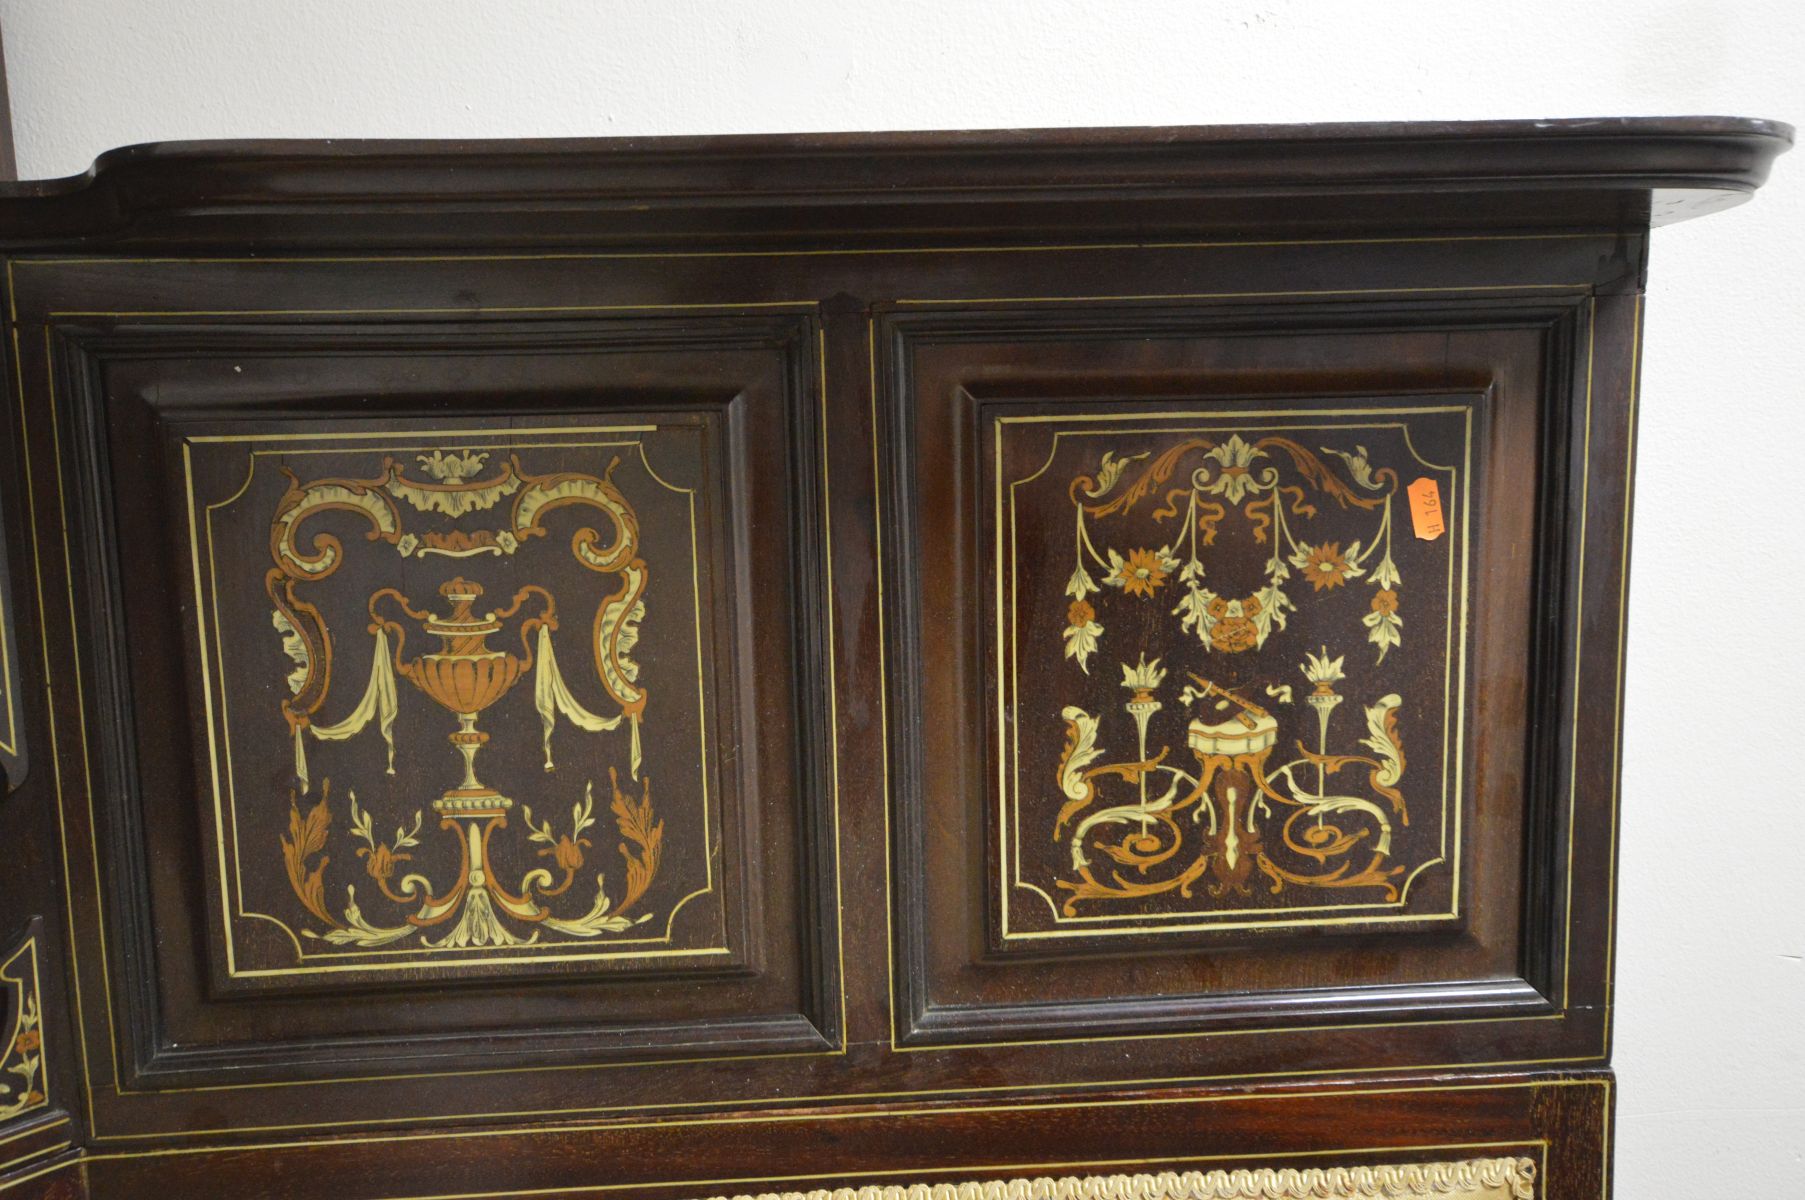 AN EDWARDIAN MAHOGANY AND MARQUETRY INLAID CORNER SOFA, the top section with four panels flanking - Image 4 of 6